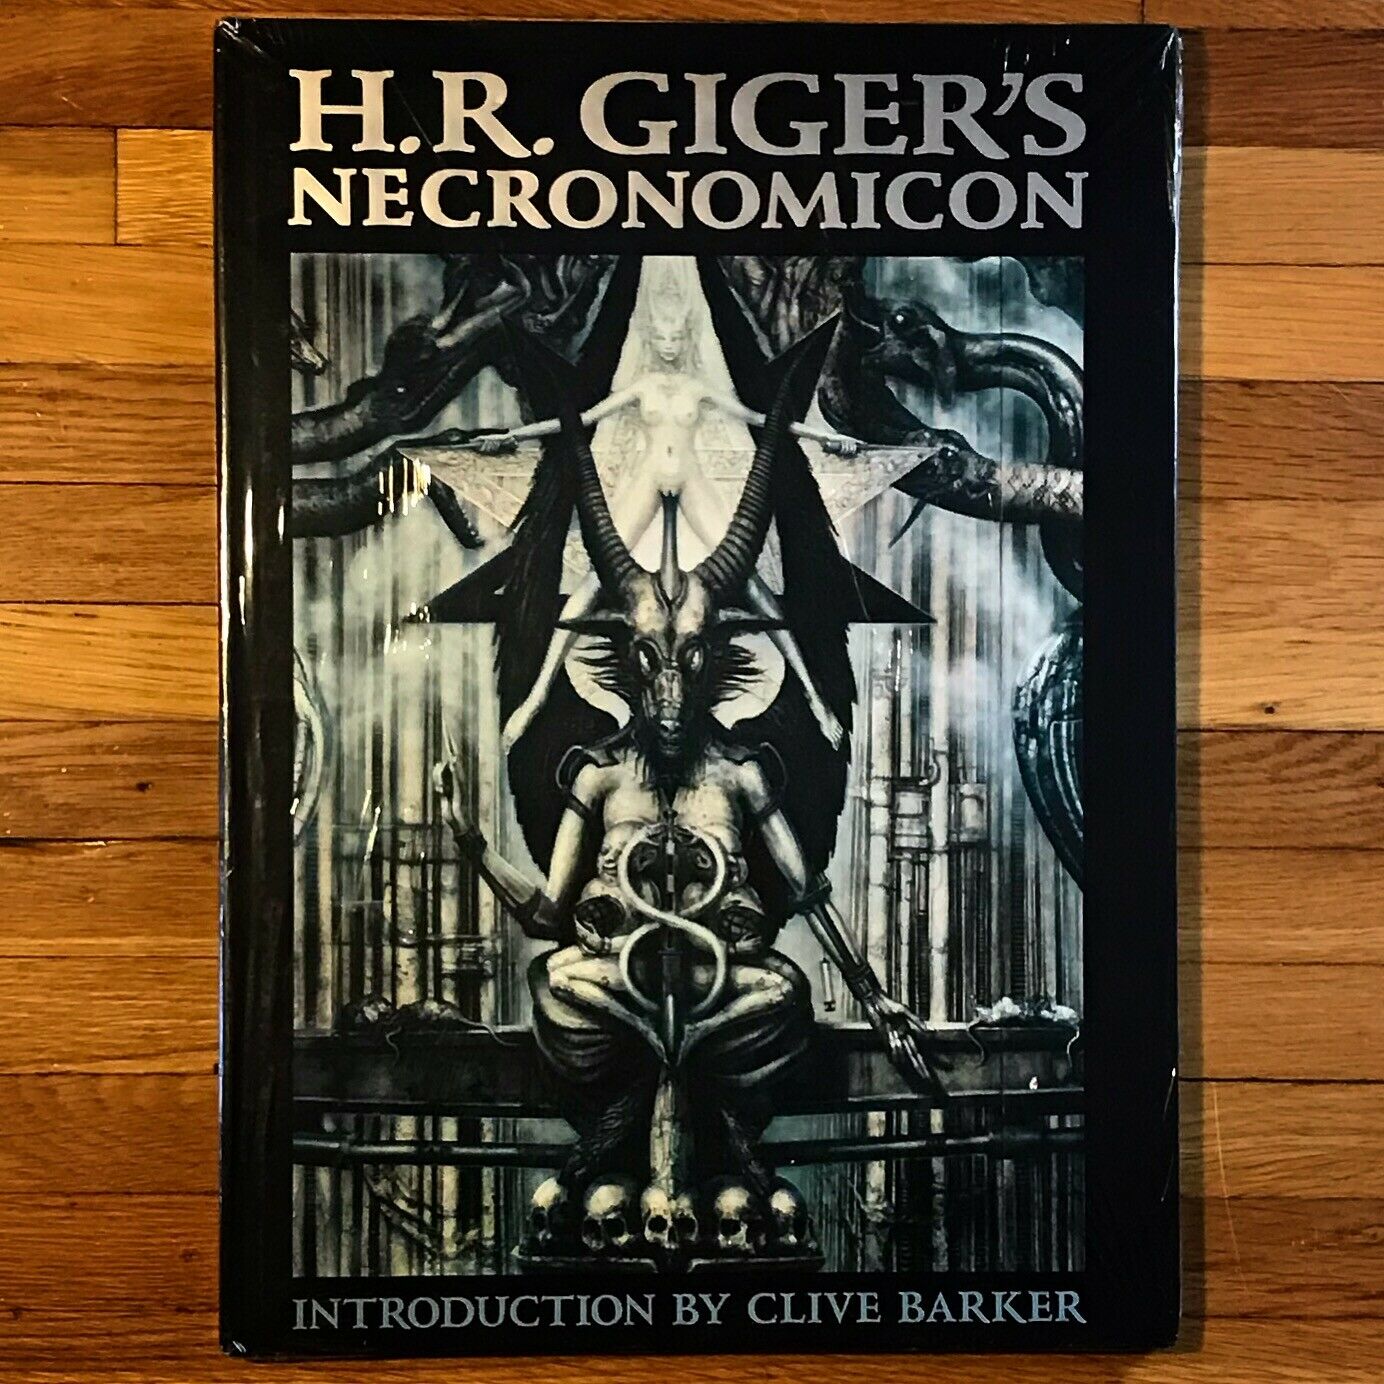 Rare Book of the Day - H.R. Giger's Necronomicon. First American 